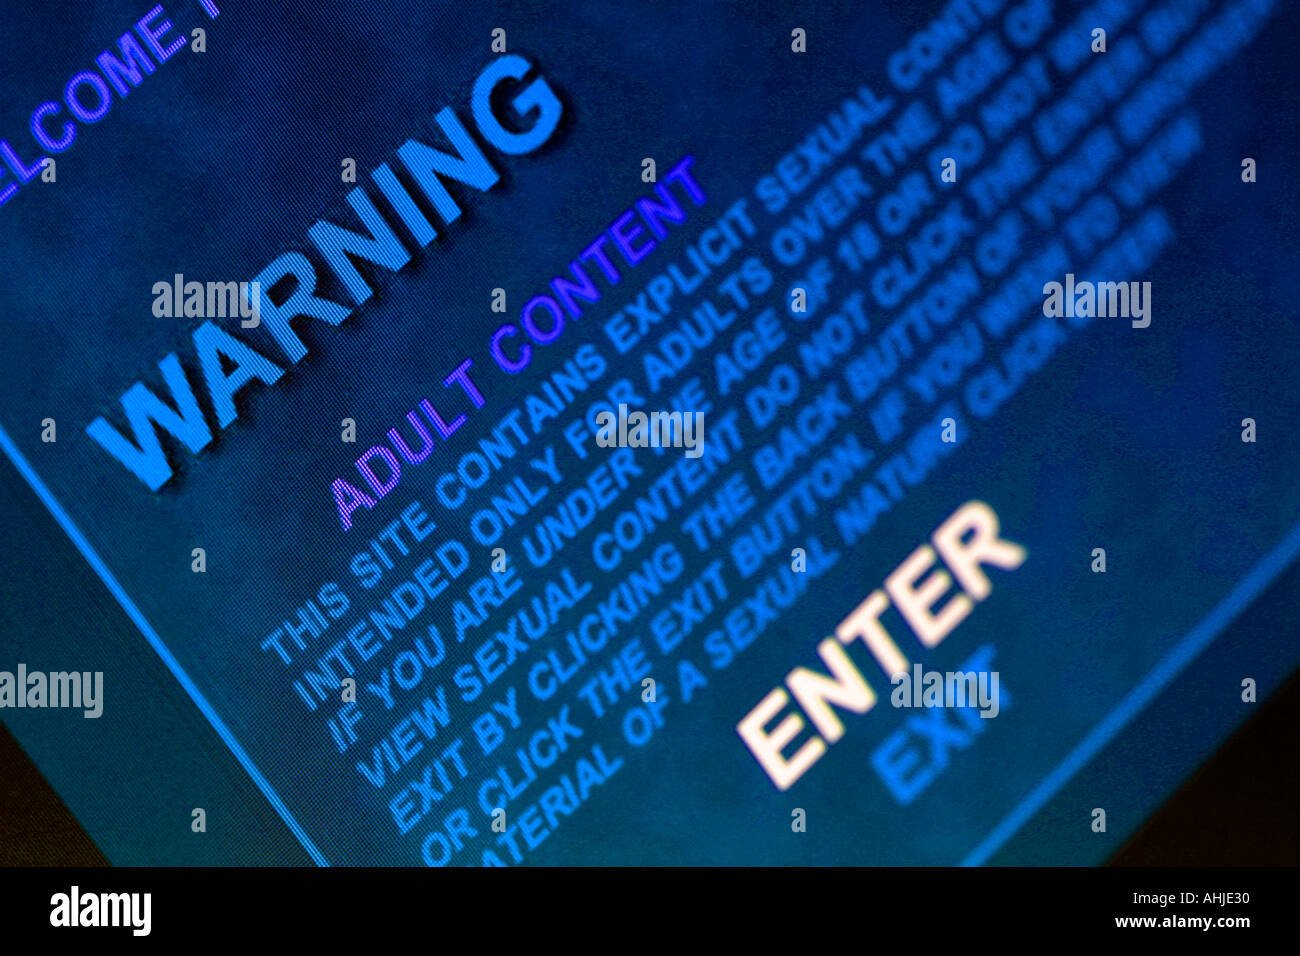 blue-entrance-page-for-joining-an-online